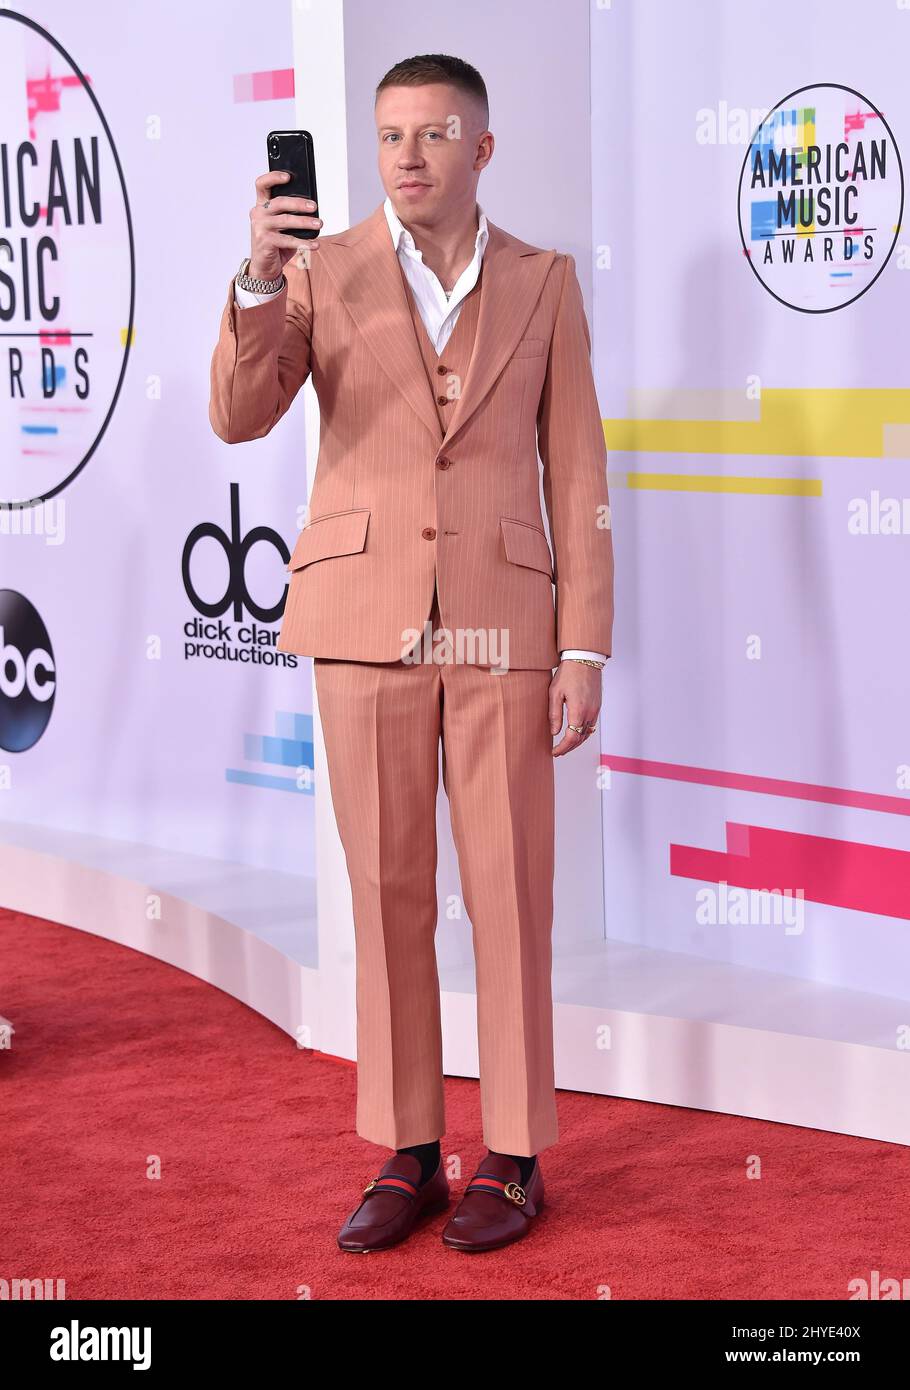 Macklemore at the 2017 American Music Awards held at the Microsoft Theatre L.A. Live Stock Photo